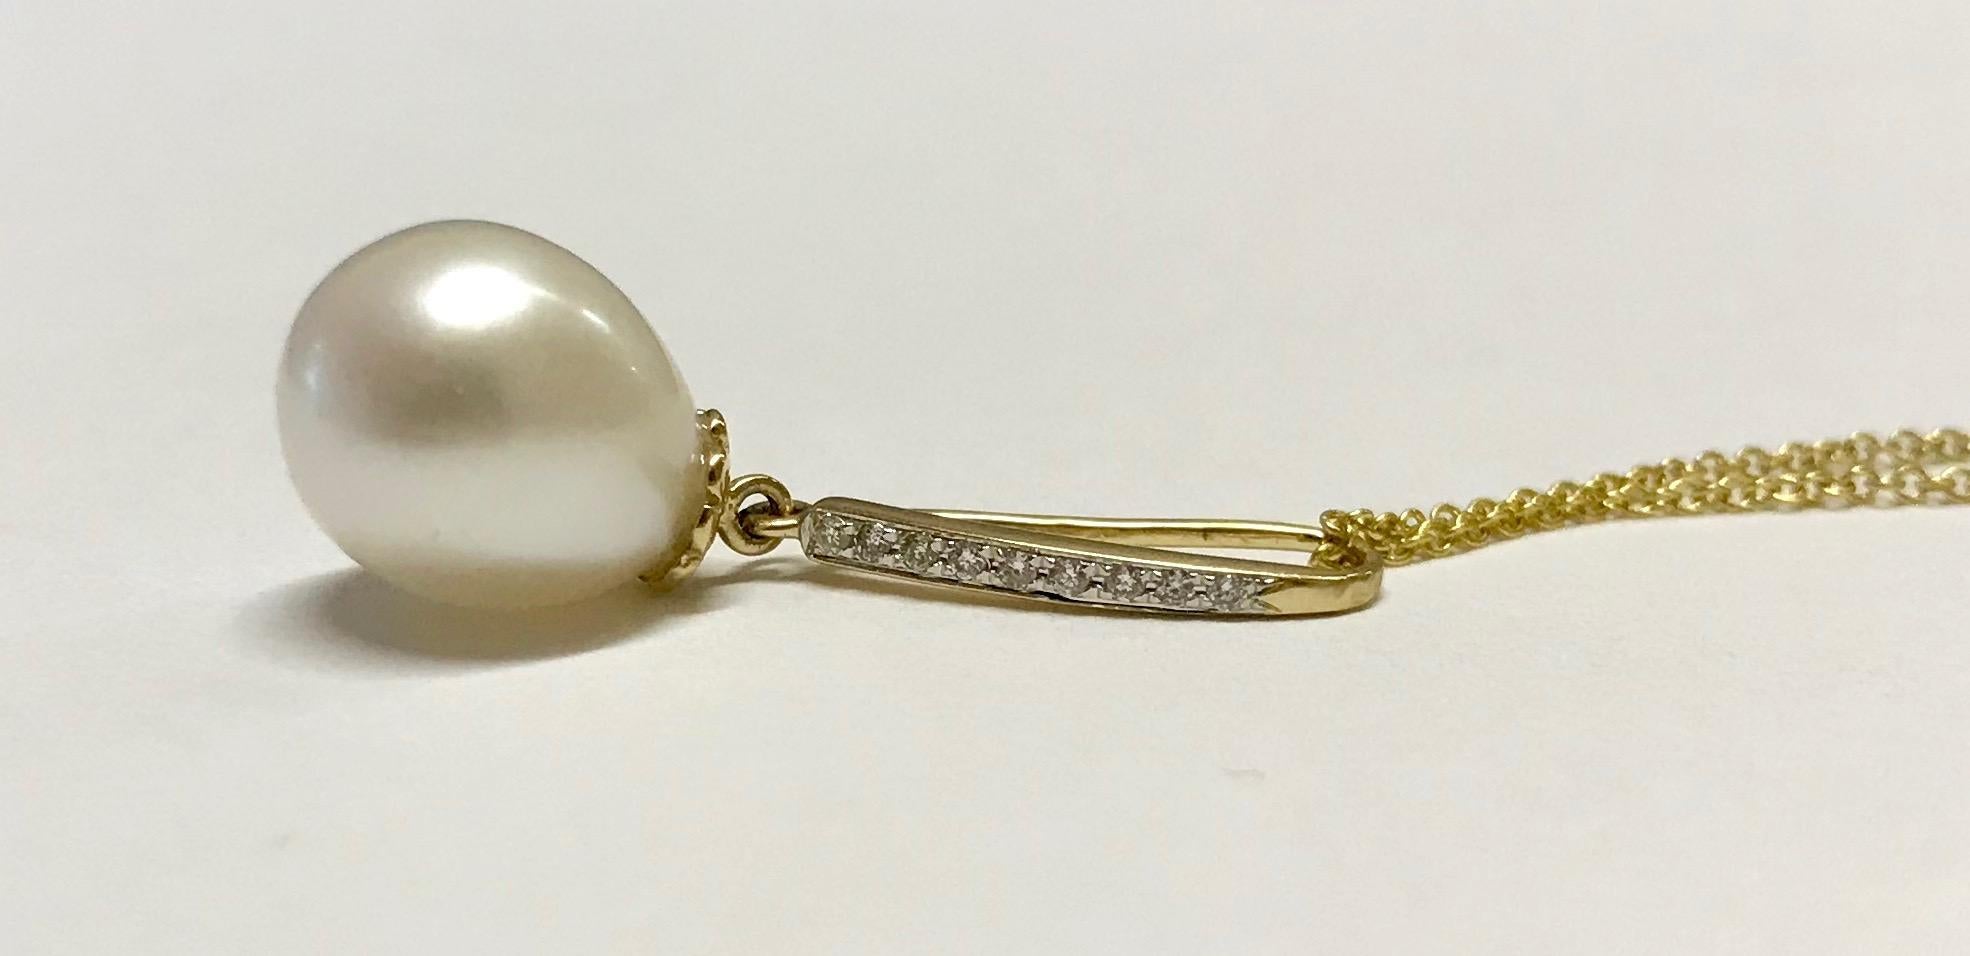 Elegant and stunning, this 9.50 carat Pearl descends from a 14K Yellow Gold setting complete with 9 Brilliant White Diamonds totaling 0.05 carat.
 
Material: 18K Yellow Gold
Center Stone Details: 9.50 Carat Pearl
Diamonds: 9 Round Diamonds at 0.05